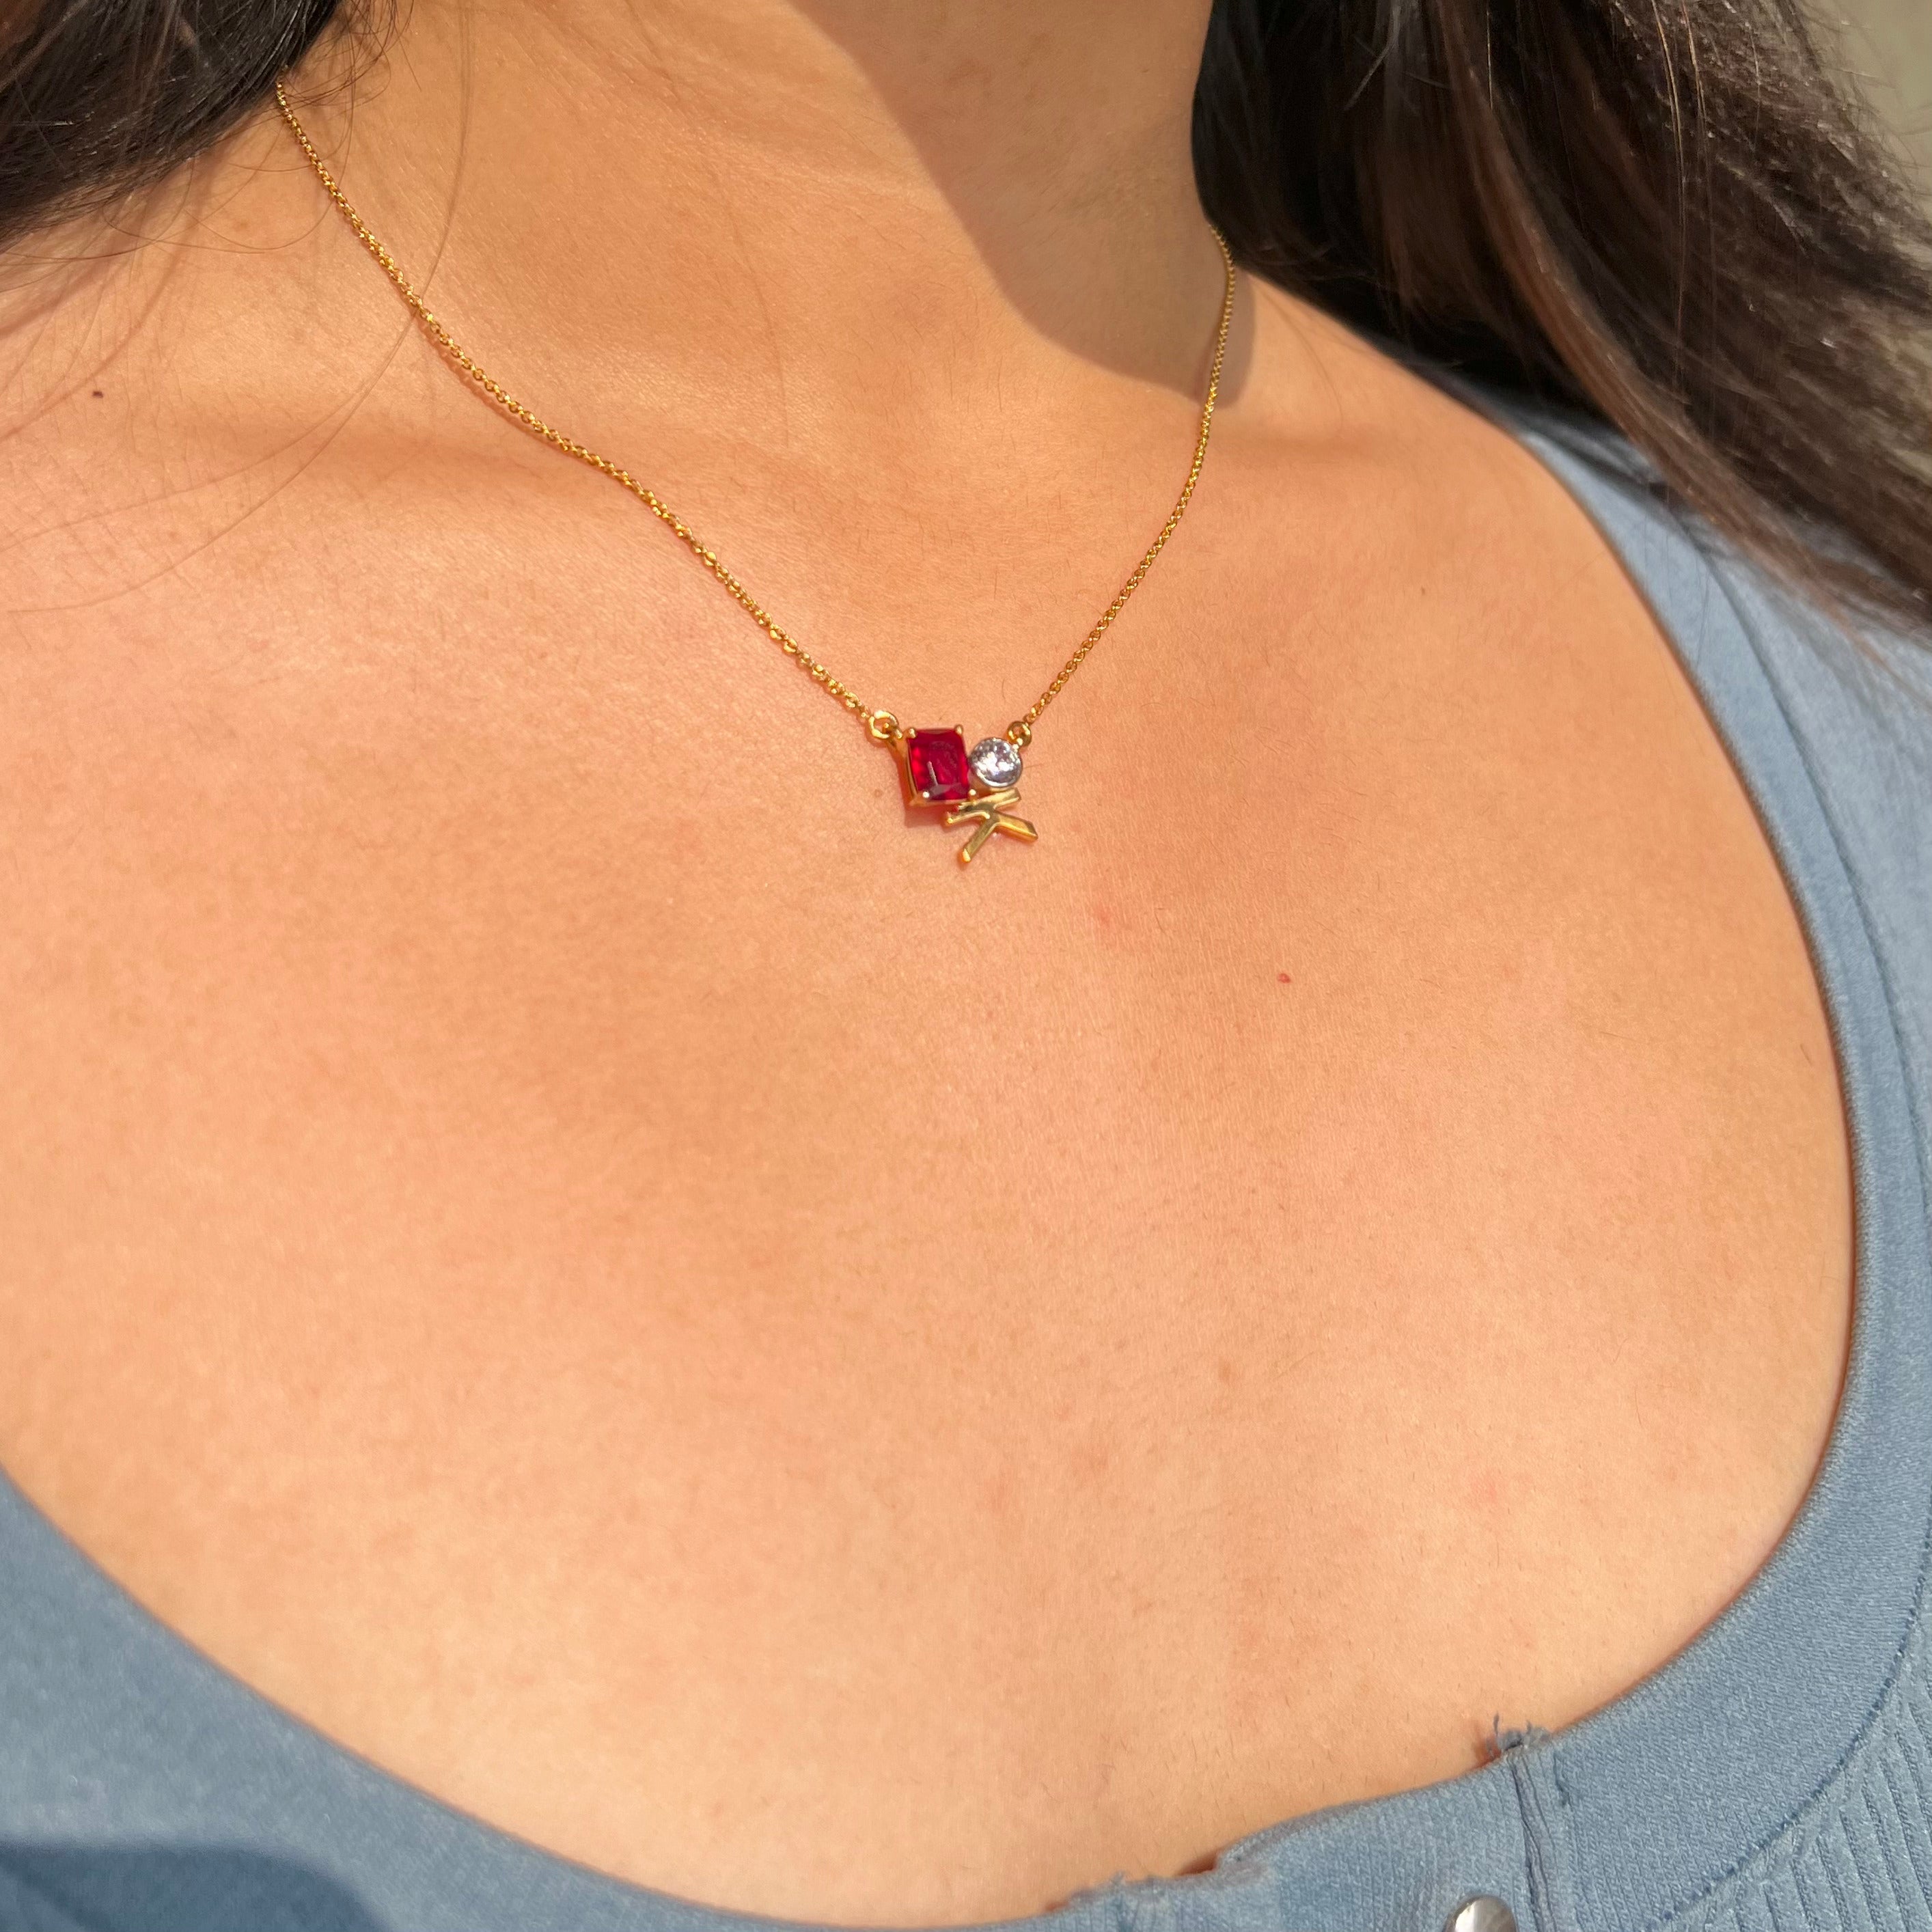 Buy 14K White Gold Ruby Necklace, Ruby Solitaire Necklace, 6mm Bezel Set  Round Ruby Necklace in 14K Gold , July Birthstone, Gemstone Online in India  - Etsy